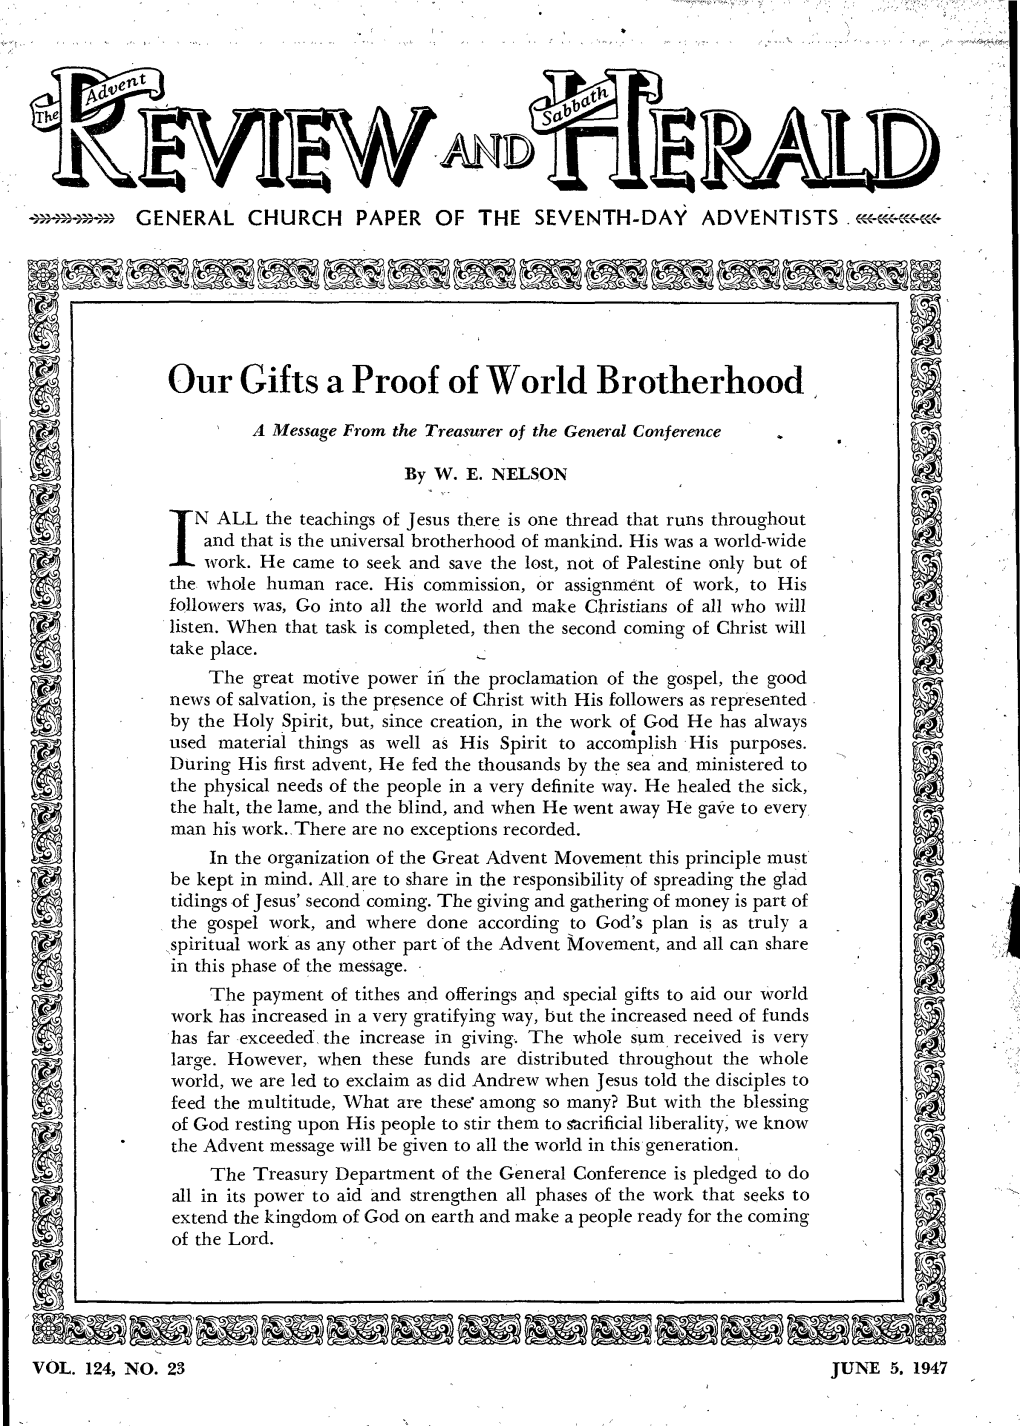 Our Gifts a Proof of World Brotherhood